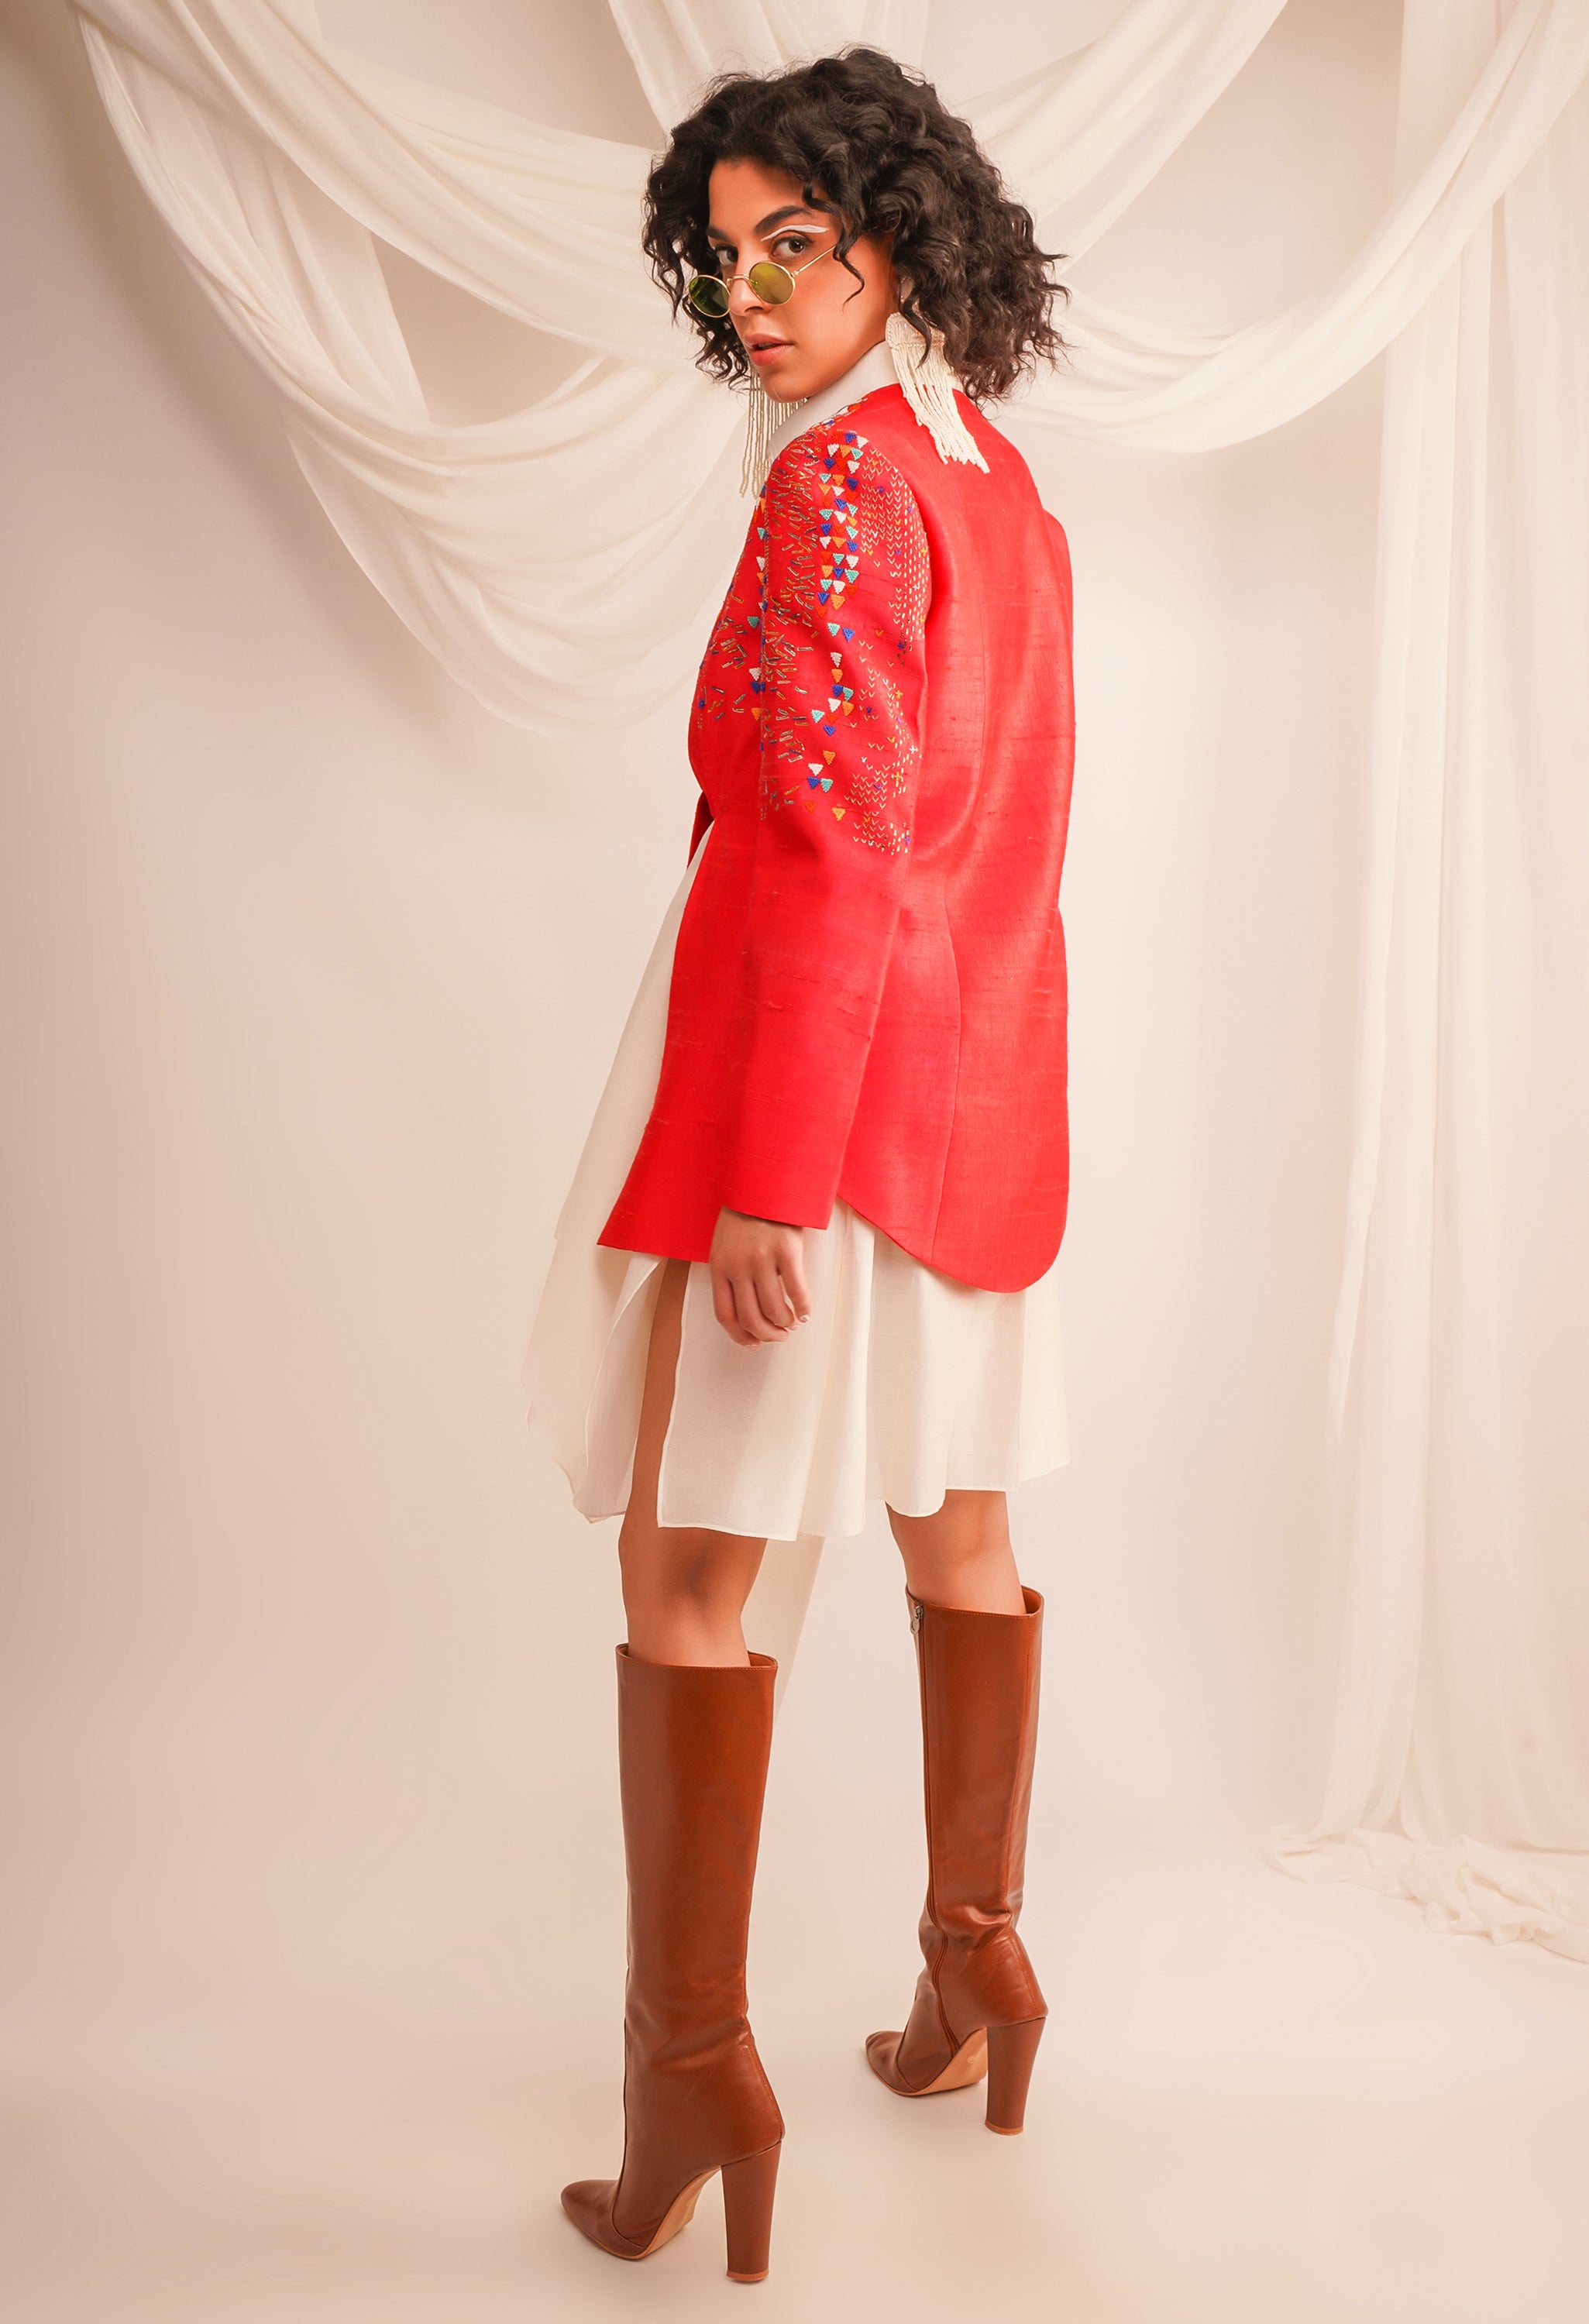 TEXTURED EMROIDERED KNOTTED DUPIAN JACKET WITH ASSYMTRICAL CHANDERI SHIRT AND PANTS